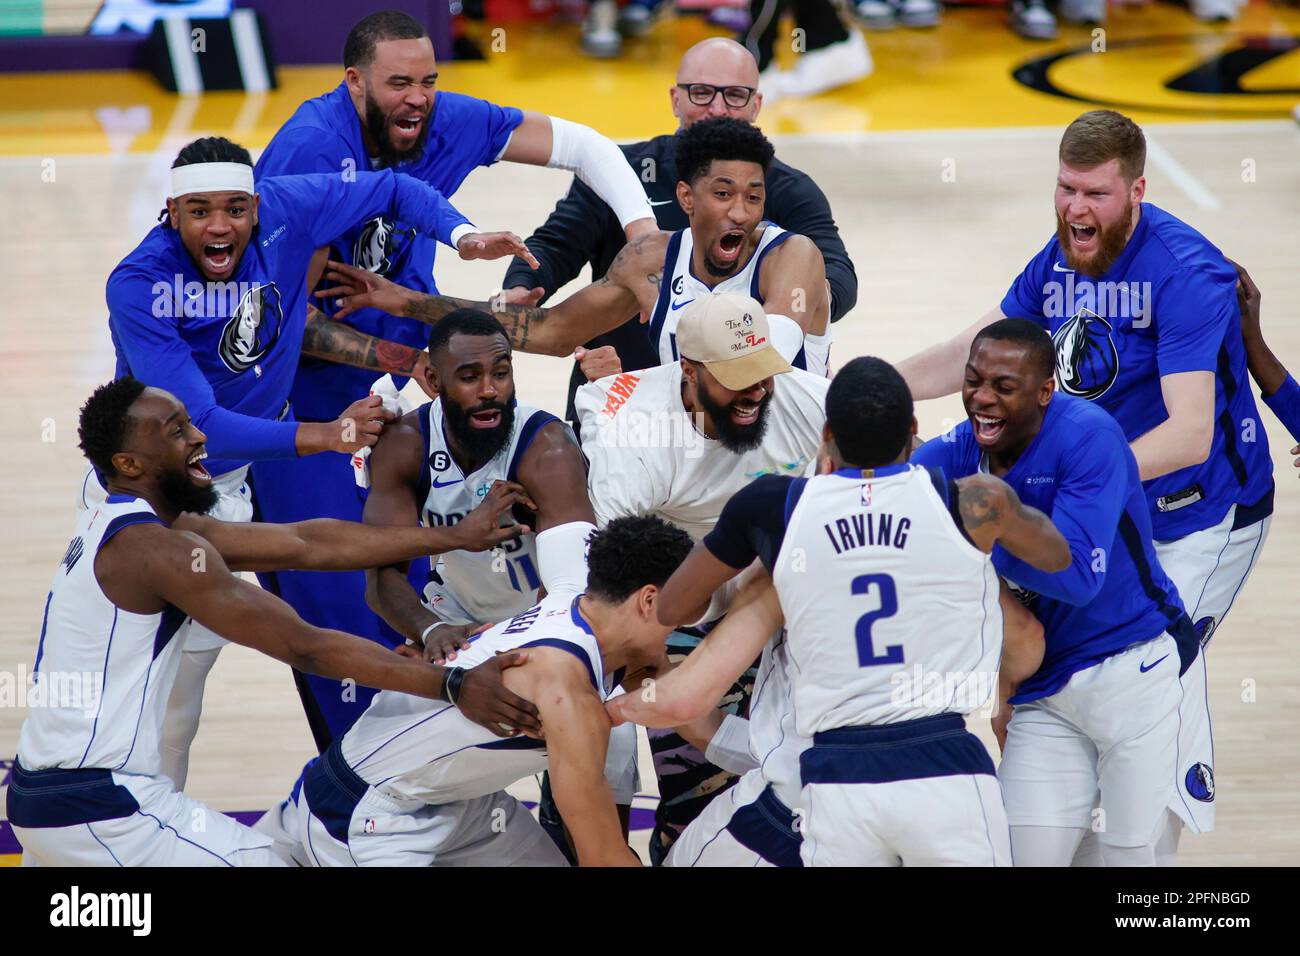 Los Angeles, United States. 17th Mar, 2023. Dallas Mavericks players celebrate after forward Maxi Kleber making a winning 3-pointer against the Los Angeles Lakers during an NBA basketball game at Crypto.com Arena in Los Angeles. Credit: SOPA Images Limited/Alamy Live News Stock Photo